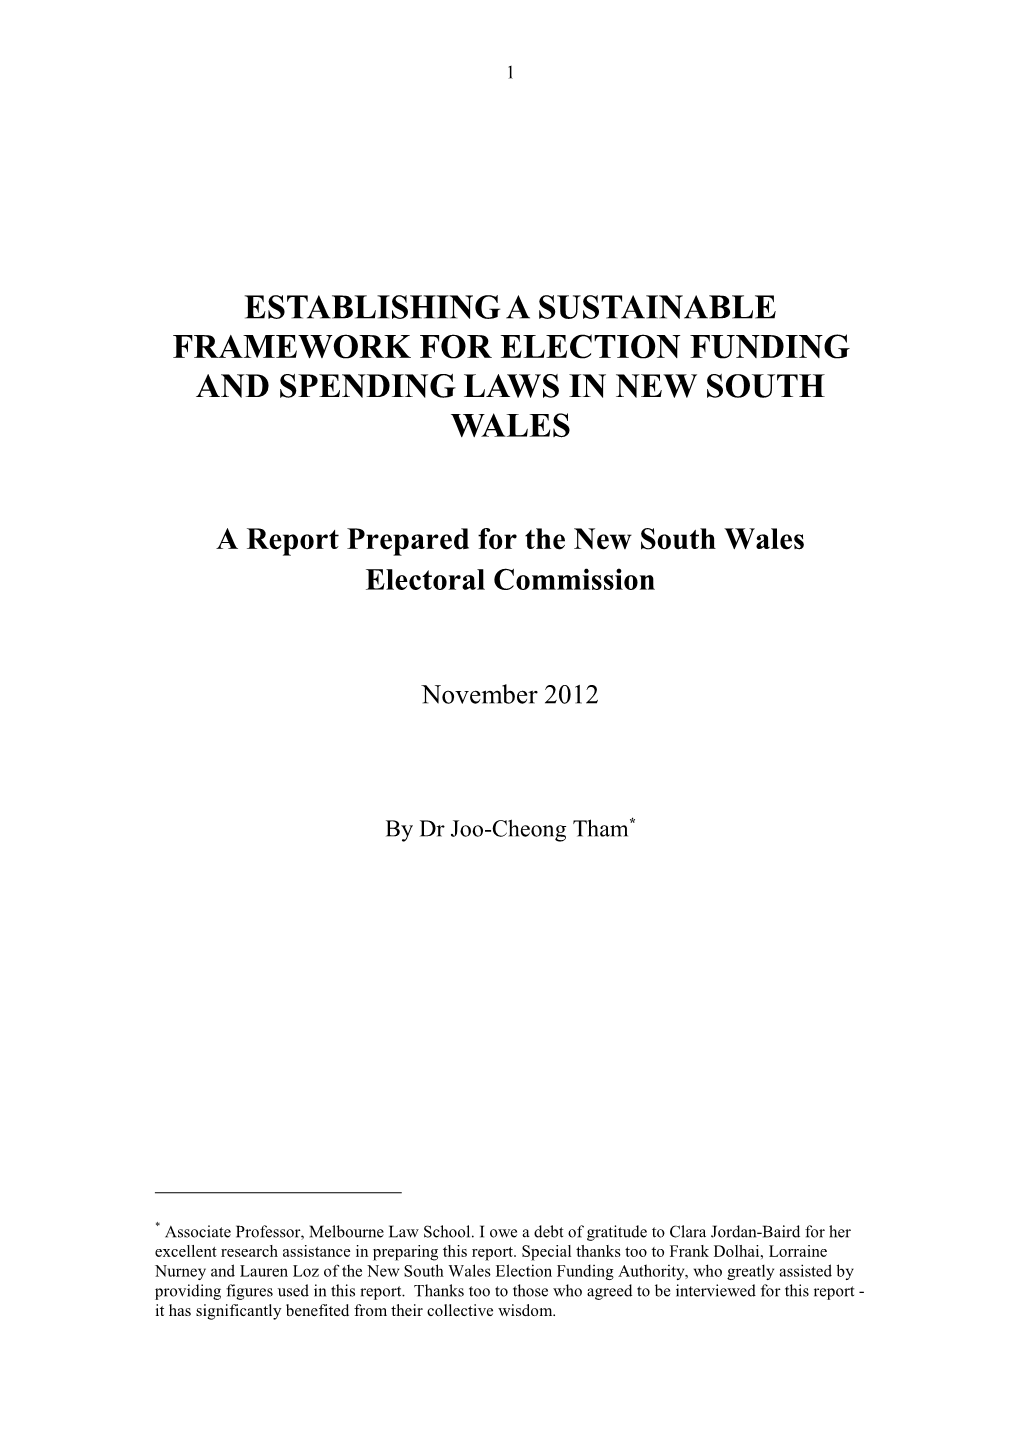 Establishing a Sustainable Framework for Election Funding and Spending Laws in New South Wales